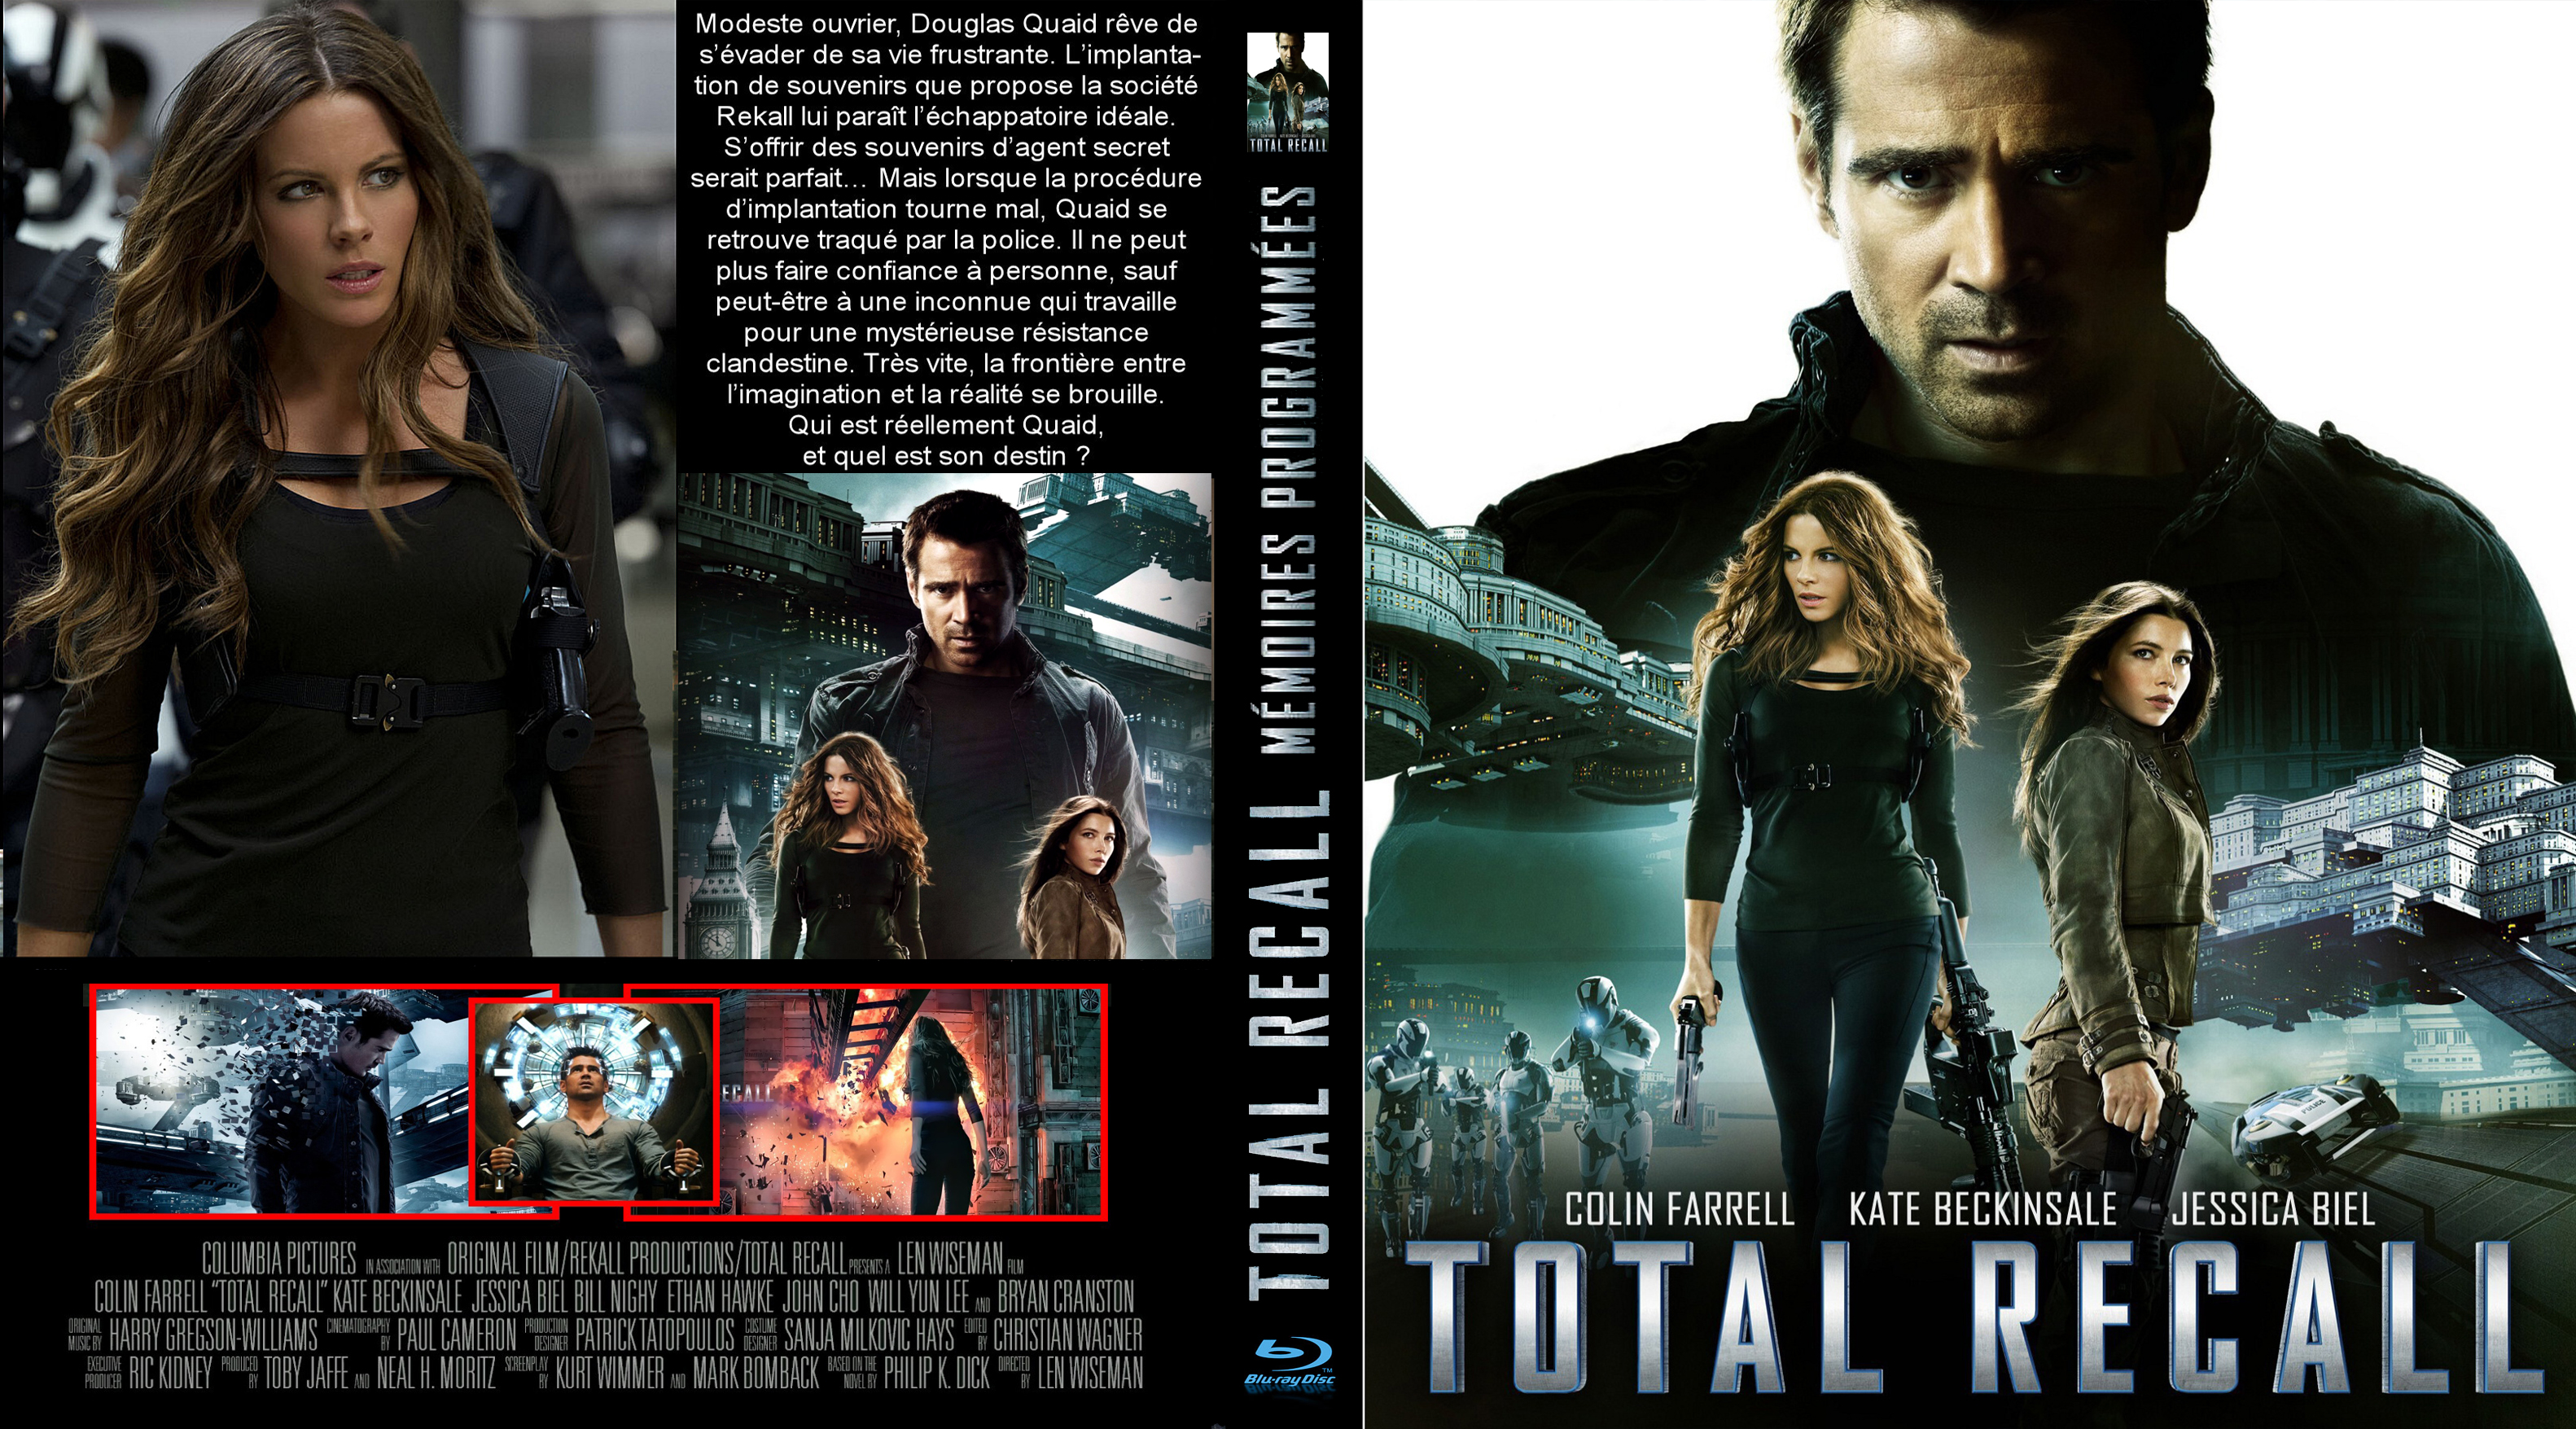 Jaquette DVD Total recall mmoires programmes custom v2 (BLU-RAY)